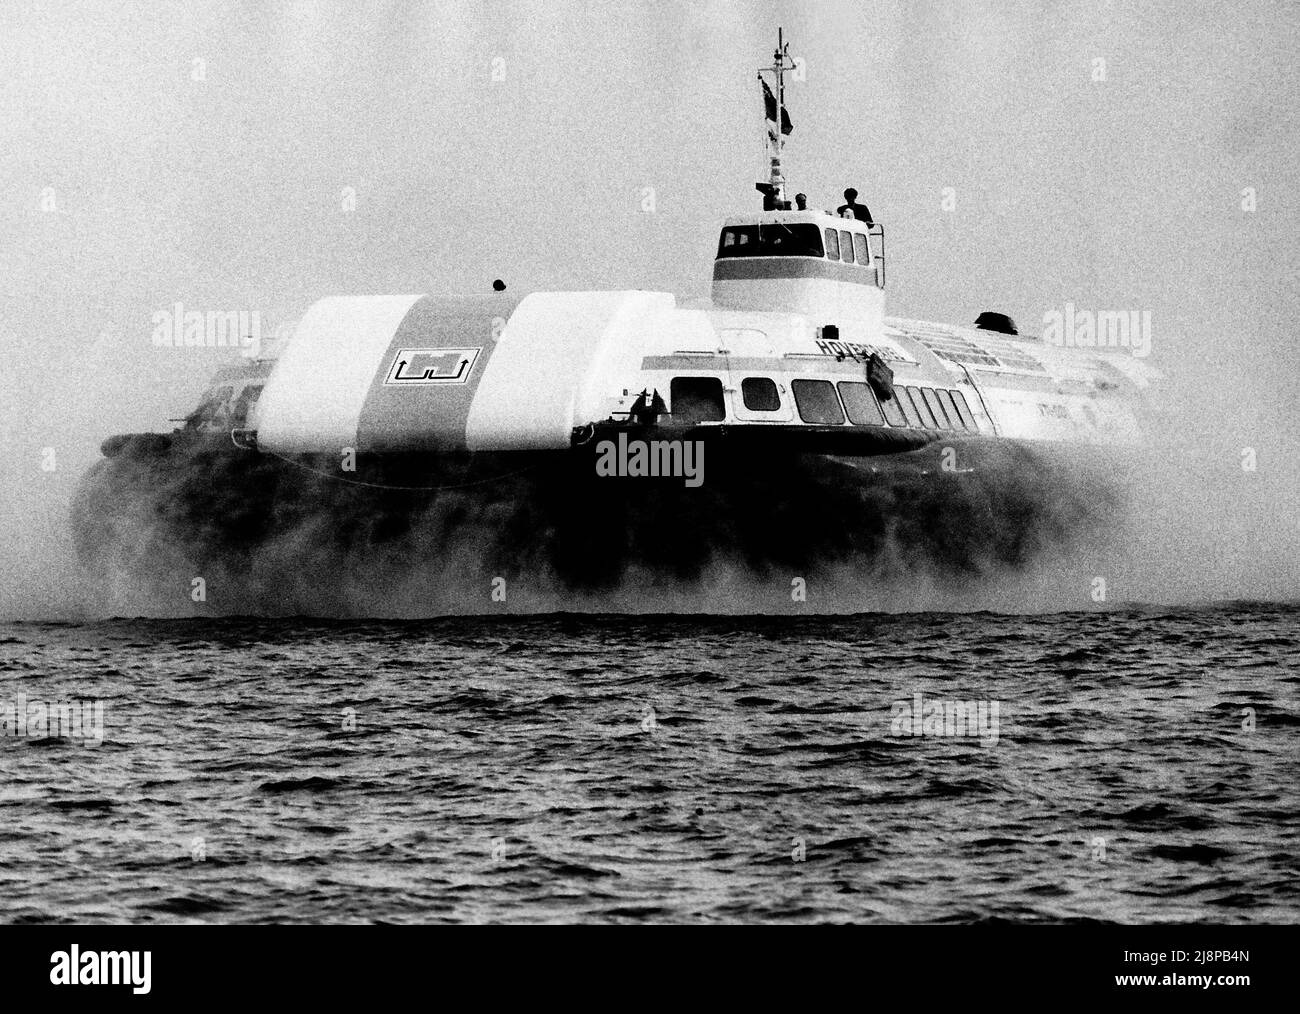 AJAXNETPHOTO. SEPTEMBER, 1969. SOLENT, ENGLAND. - VOSPER VT1-001 SEMI AMPHIBIOUS HOVERCRAFT ON SEA TRIALS. THE 90 TON AIR-CUSHION CRAFT BUILT  AT VOSPER'S PORTCHESTER WORKS CAN CARRY 10 CARS AND 146 PASSENGERS OR ONLY 270 PASSENGERS WITH A RANGE OF 320 NMILES AT A SPEED OF 40KNOTS.  PHOTO:JONATHAN EASTLAND/AJAX REF:356946 21A 4 Stock Photo